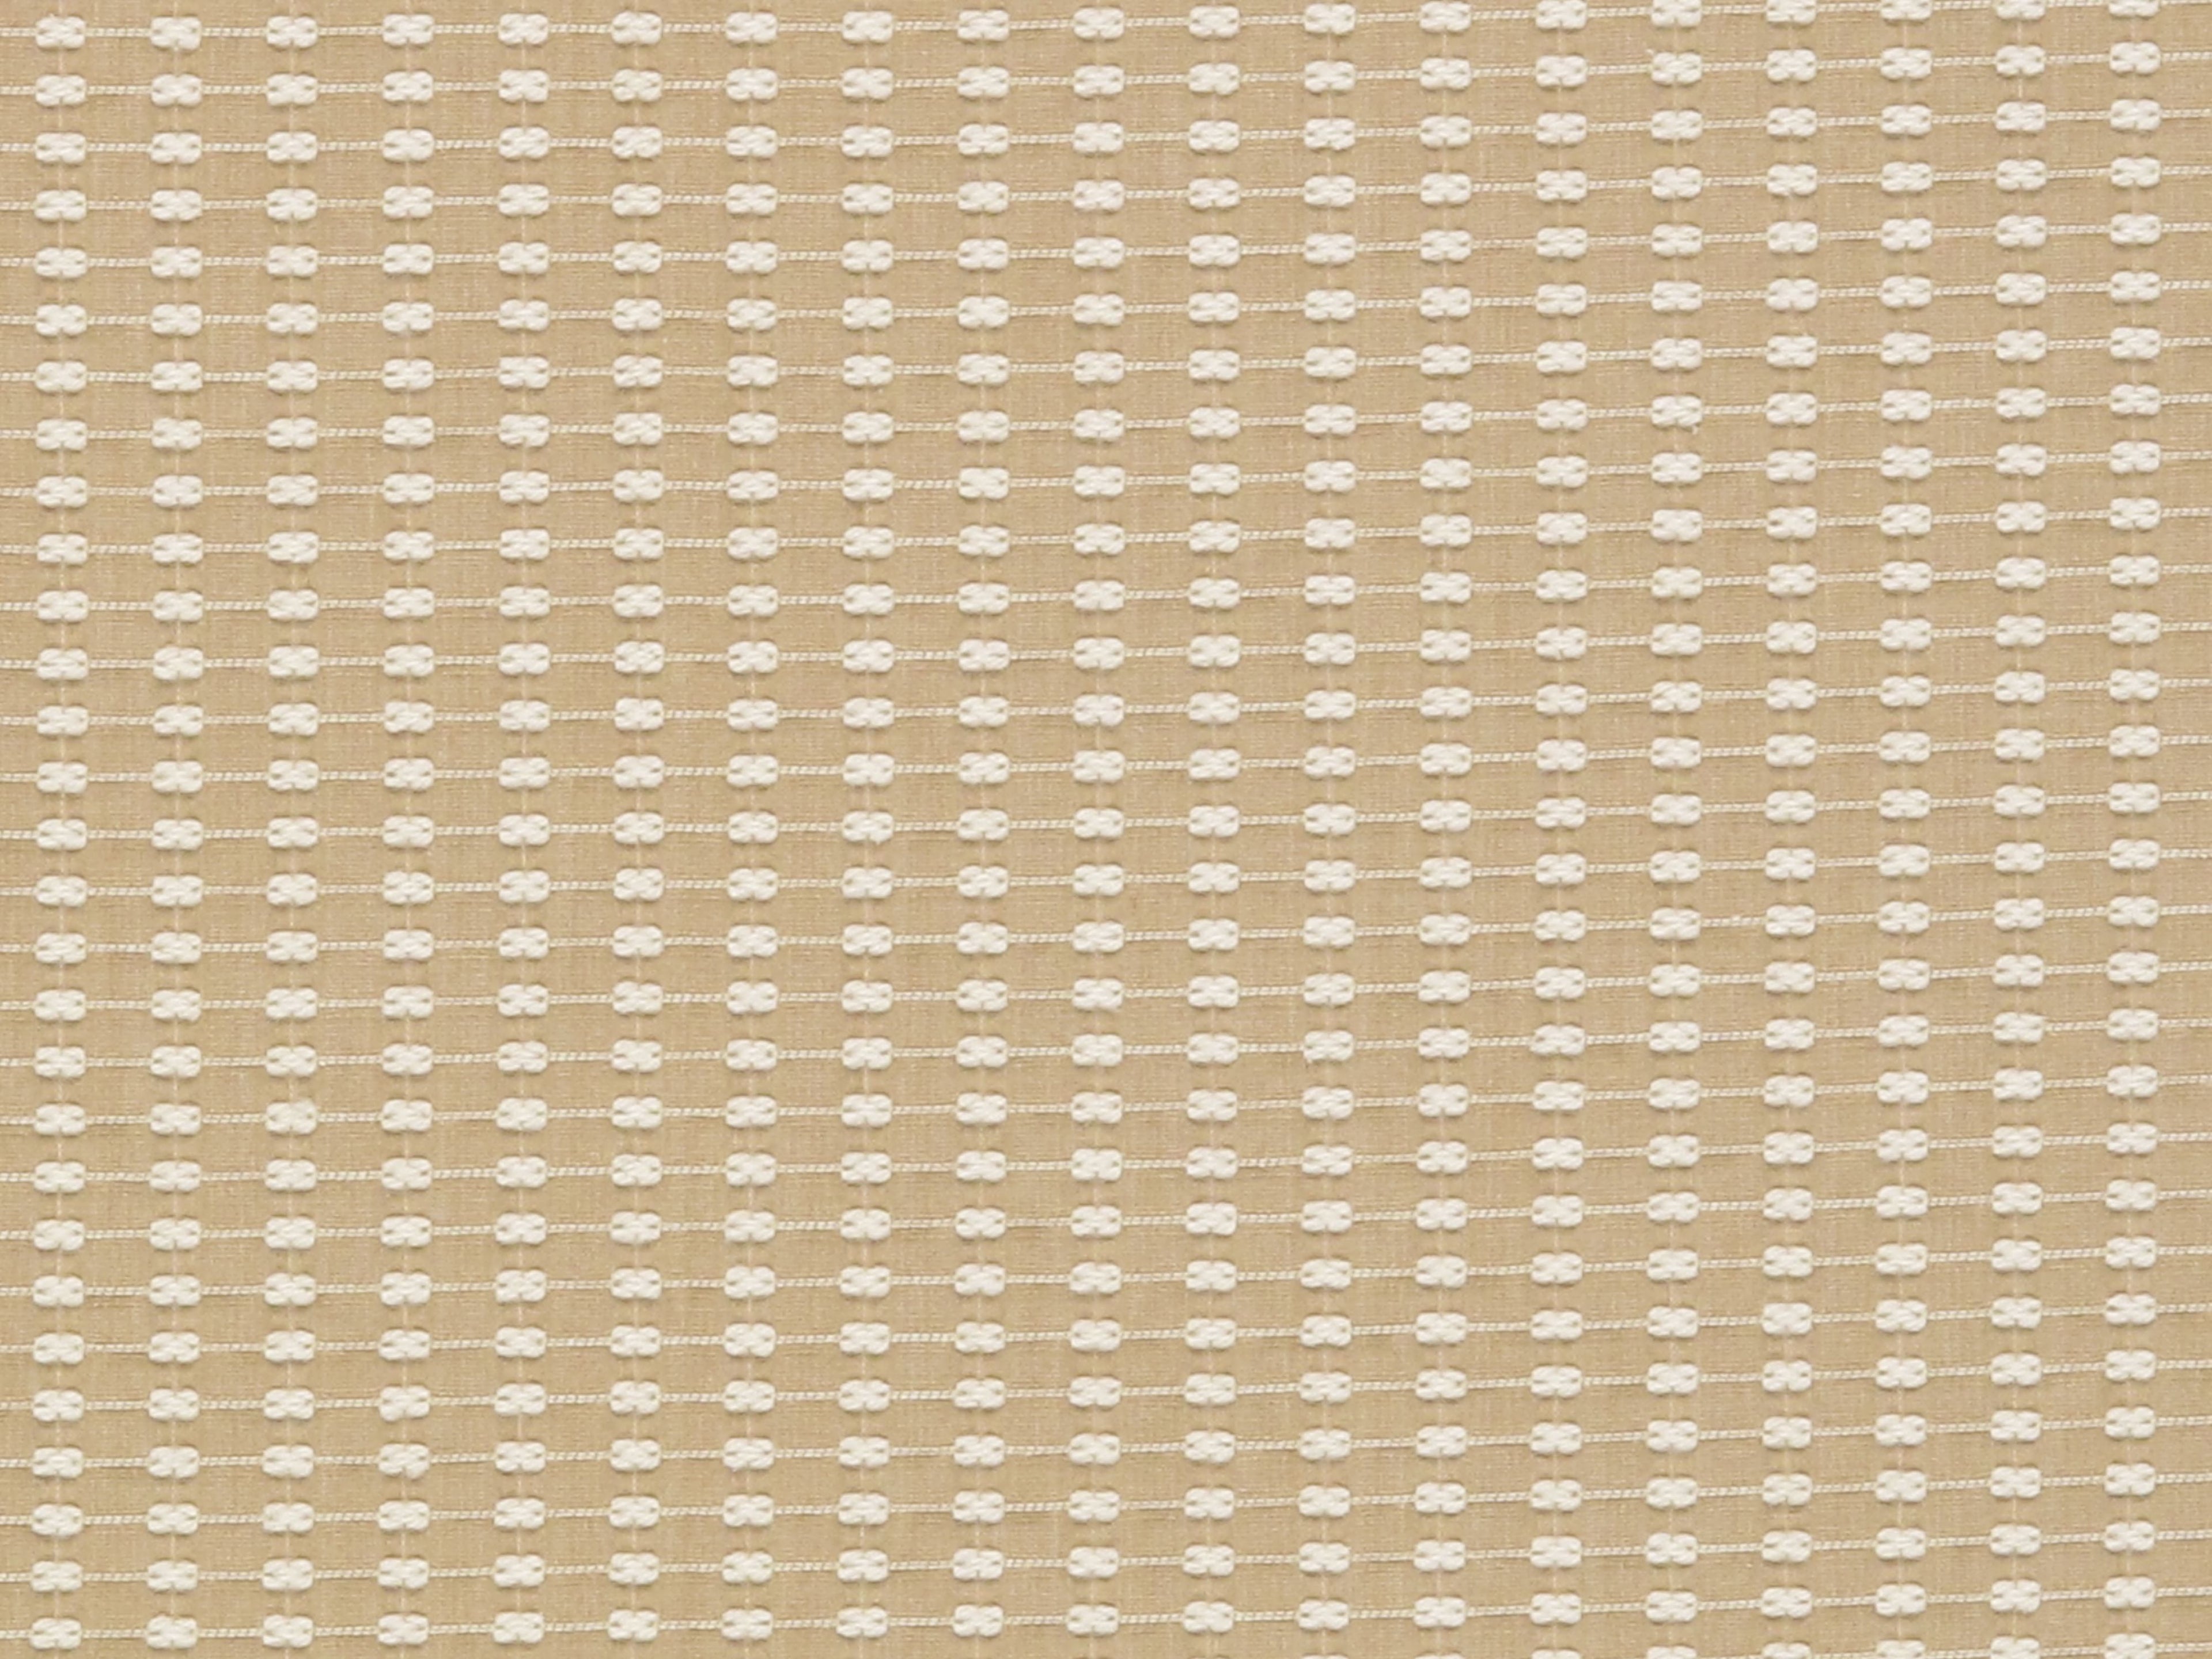 Brigham Texture fabric in antique gold color - pattern number VW 00028649 - by Scalamandre in the Old World Weavers collection